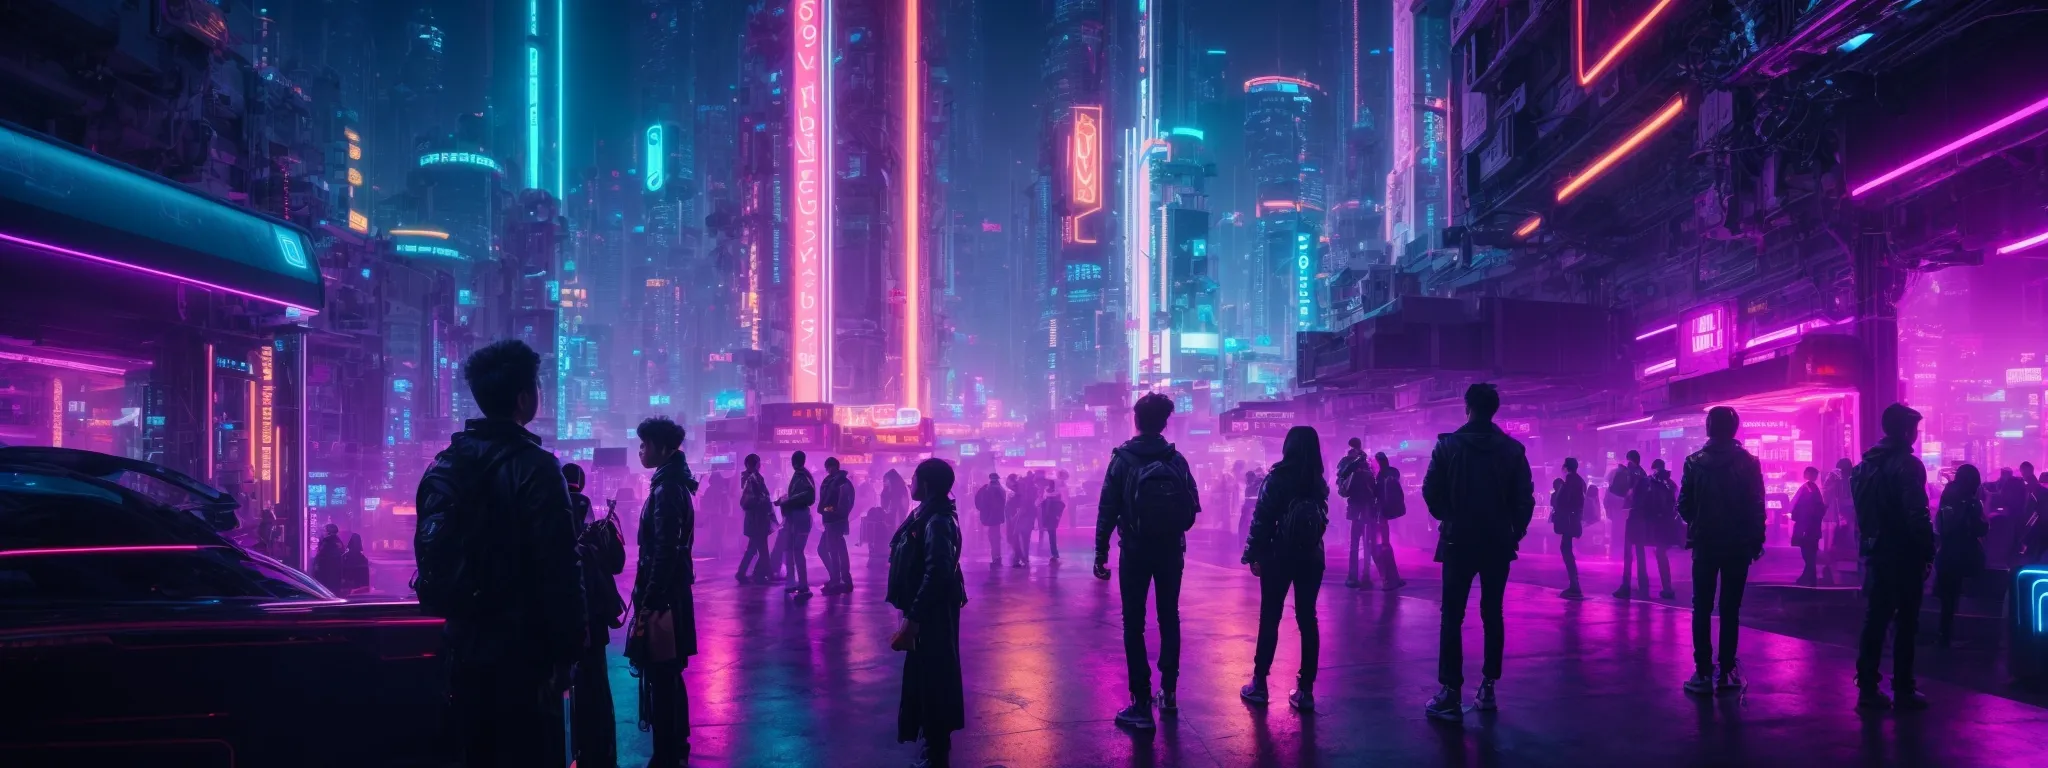 a futuristic cityscape bathed in neon lights with silhouettes of people interacting with advanced technology interfaces.